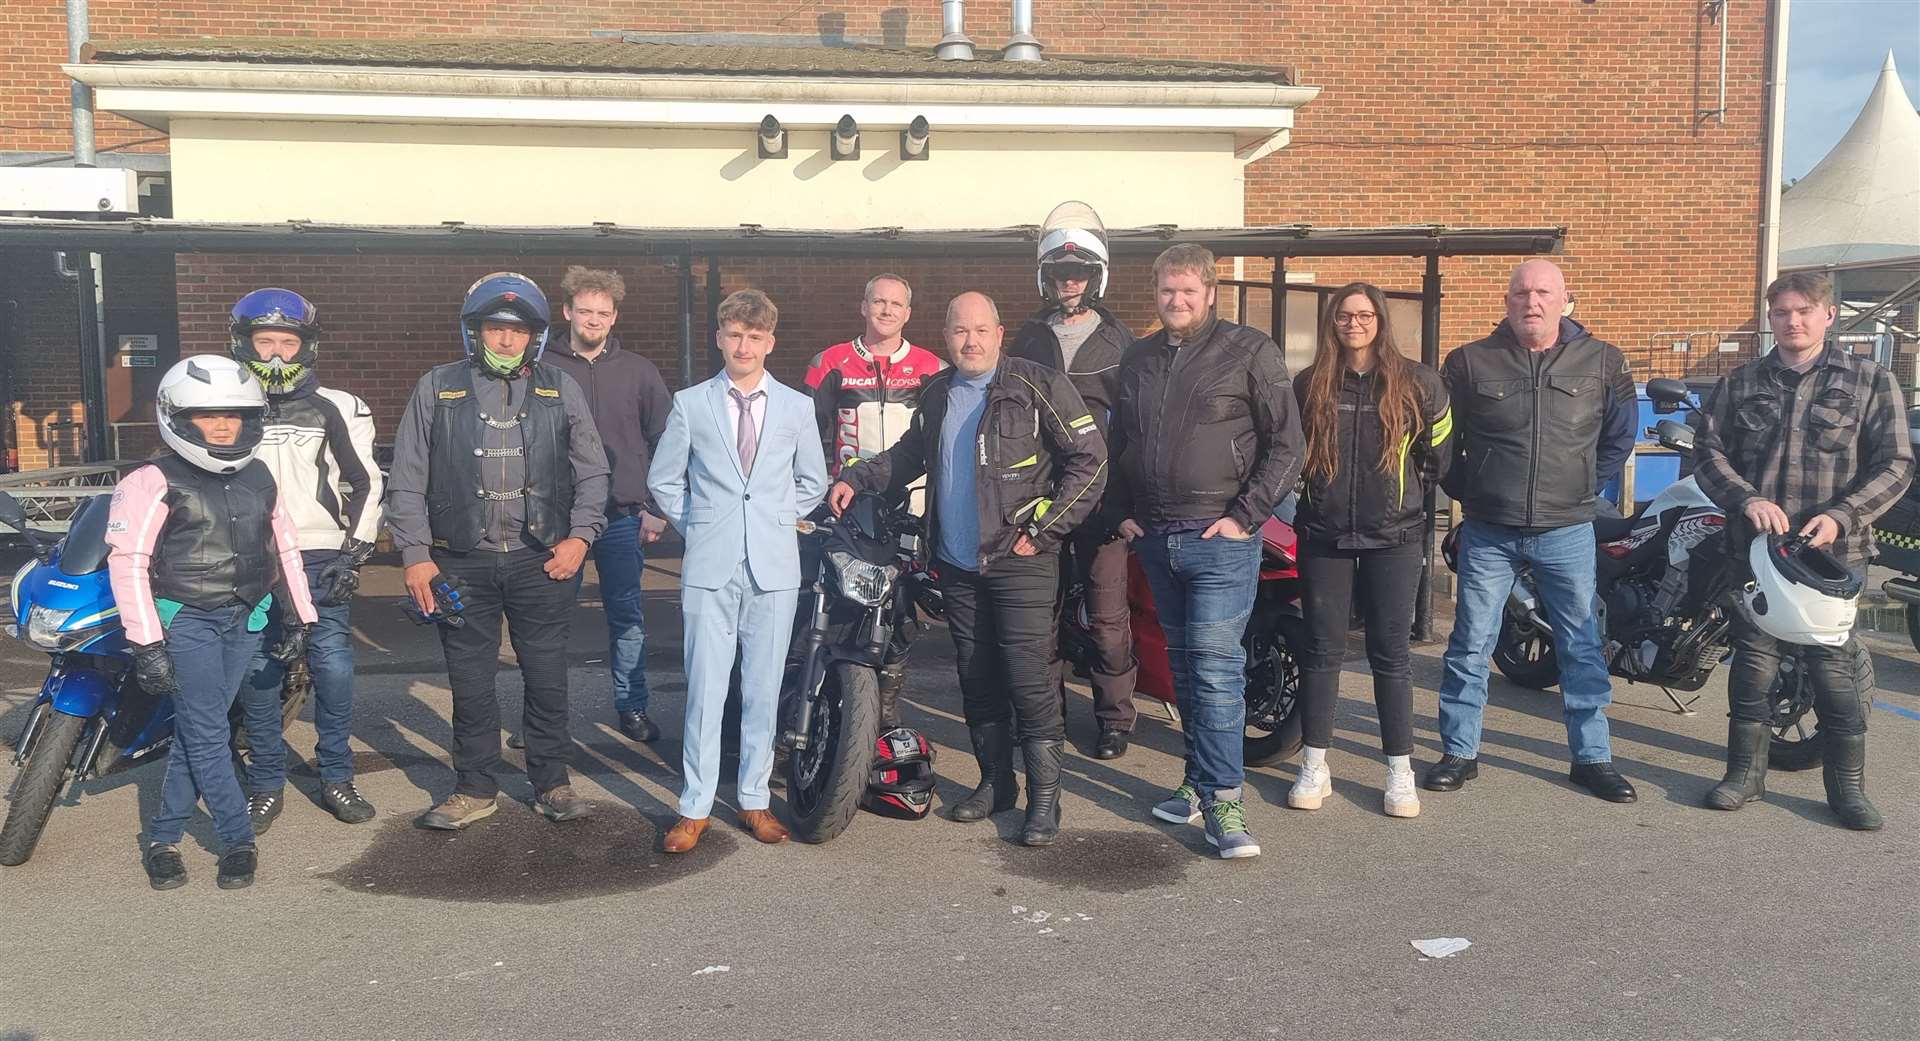 Charlie rocked up to his school prom with nine bikes alongside in supportPictures: SWNS